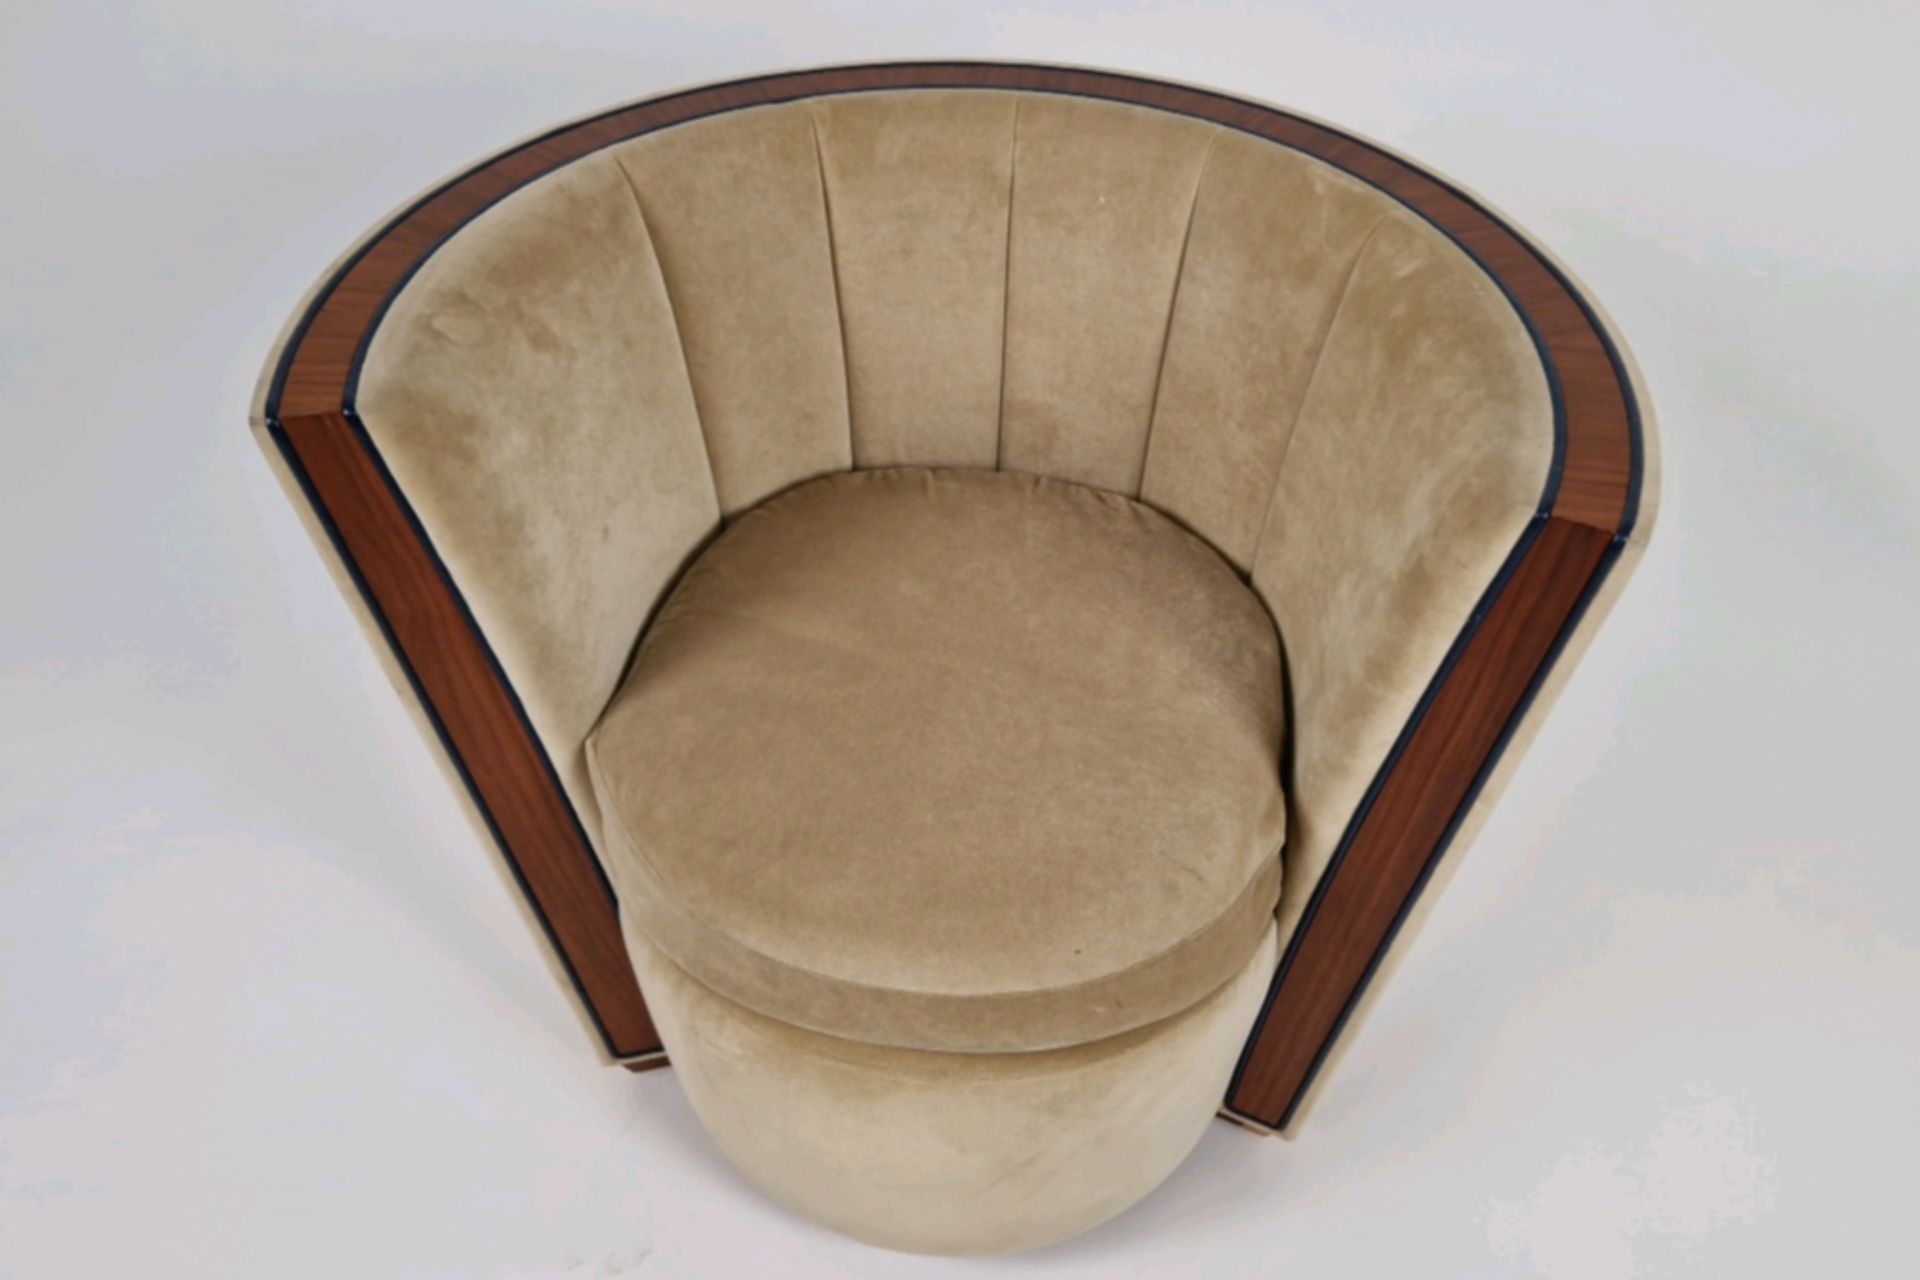 Bespoke Deco Tub Chair Made for Claridge's by David Linley - Image 5 of 12